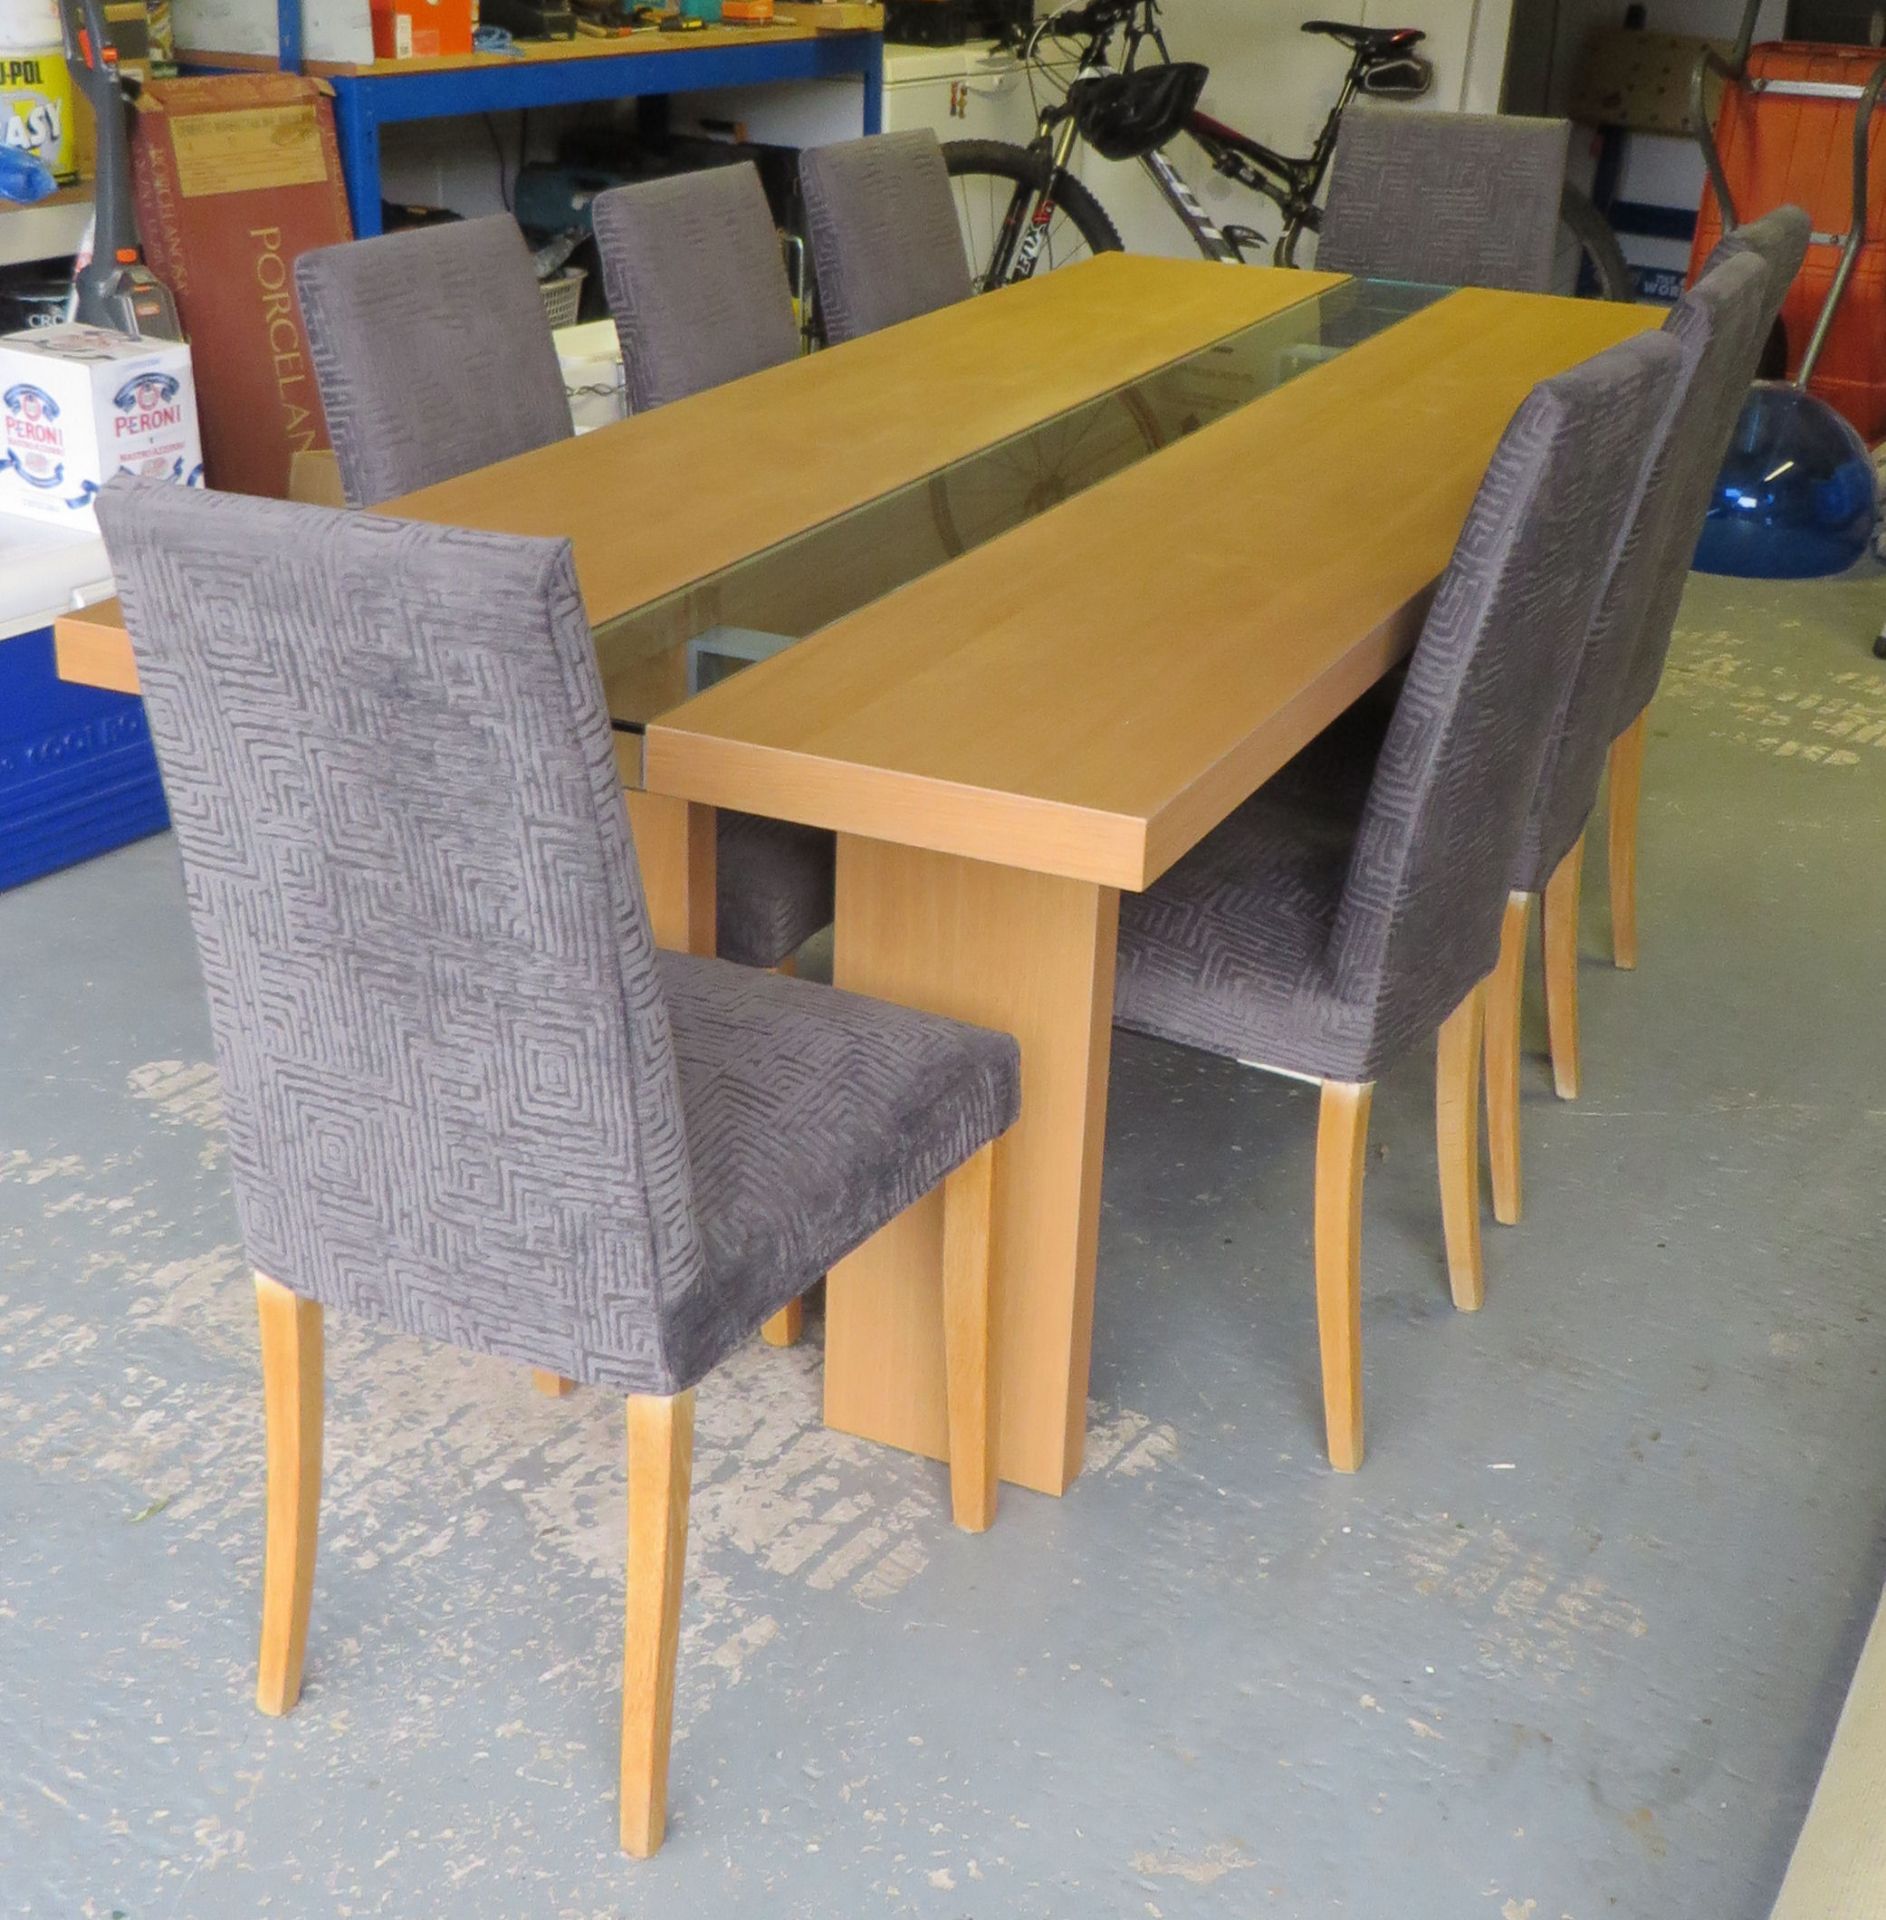 1 x Natural Oak Bross Ritz Dining Table and 8 Ligne Roset Dining Chairs - All in Excellent Condition - Image 9 of 9